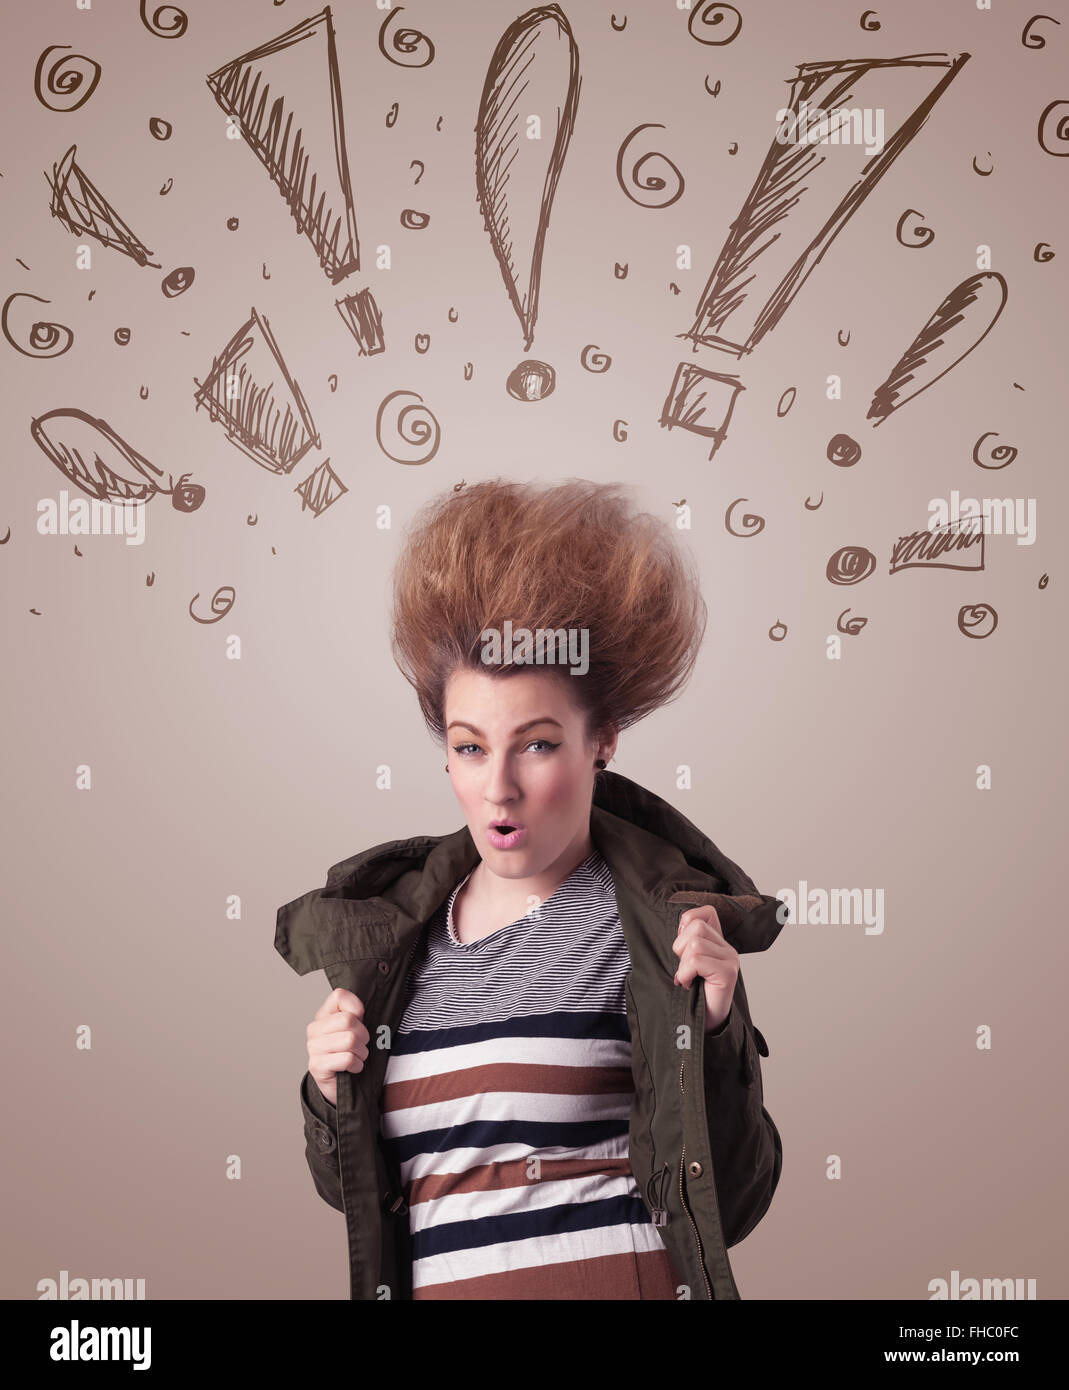 Young woman with hair style and hand drawn exclamation signs Stock Photo